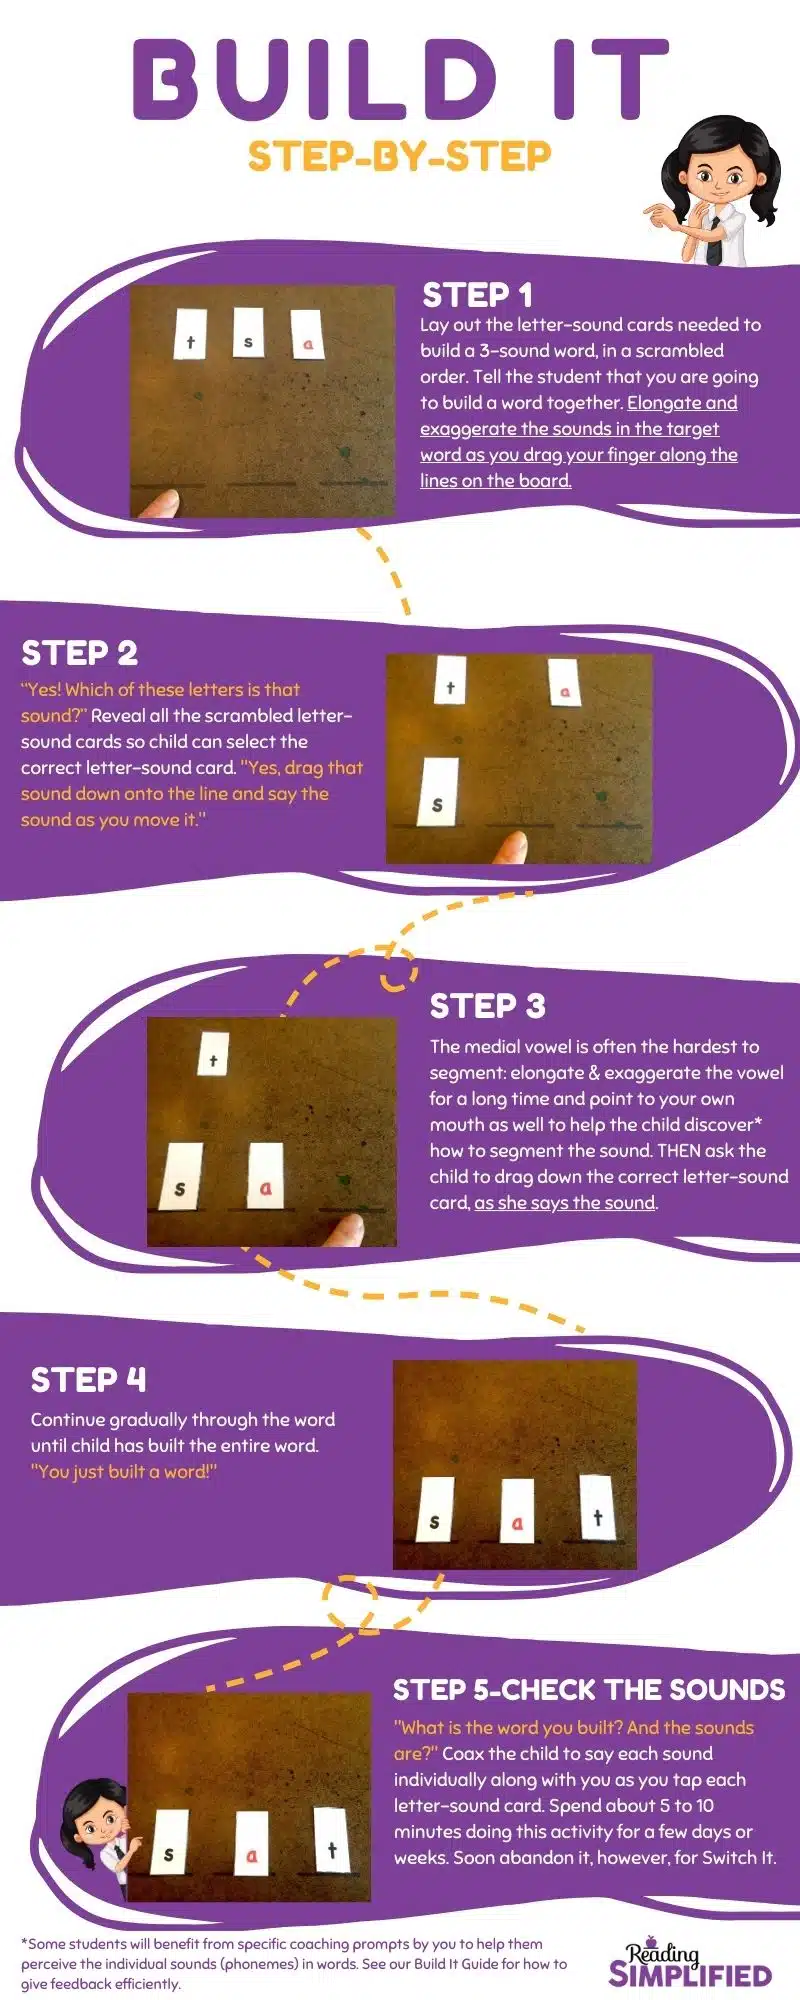 Build It Step by Step infographic